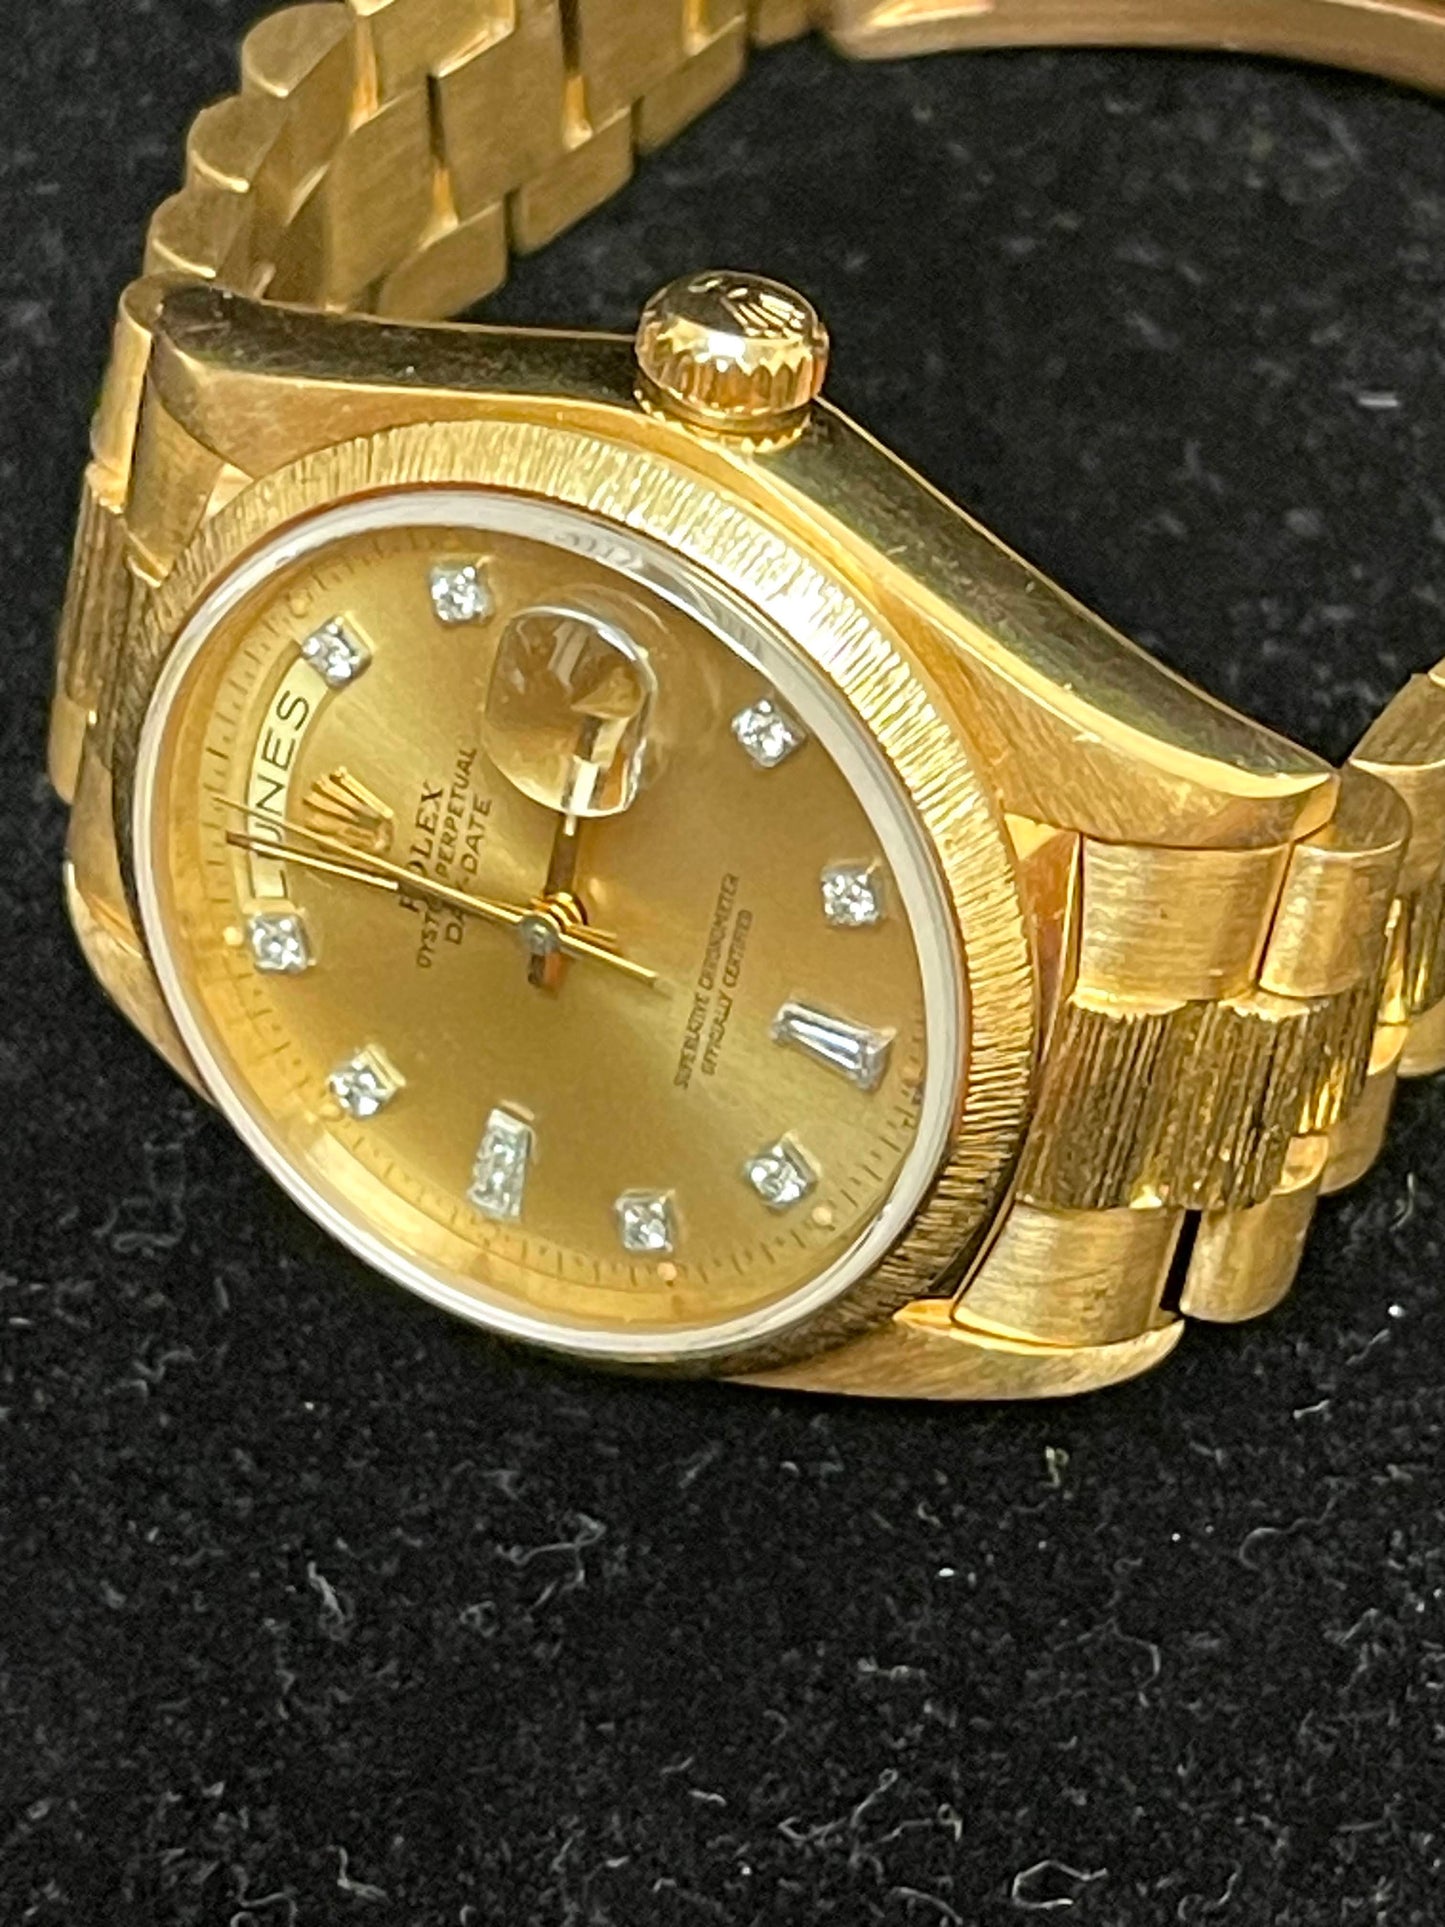 1979 Rolex Day-Date 18078 Champagne Diamond Dial Spanish Datewheel No Papers 36